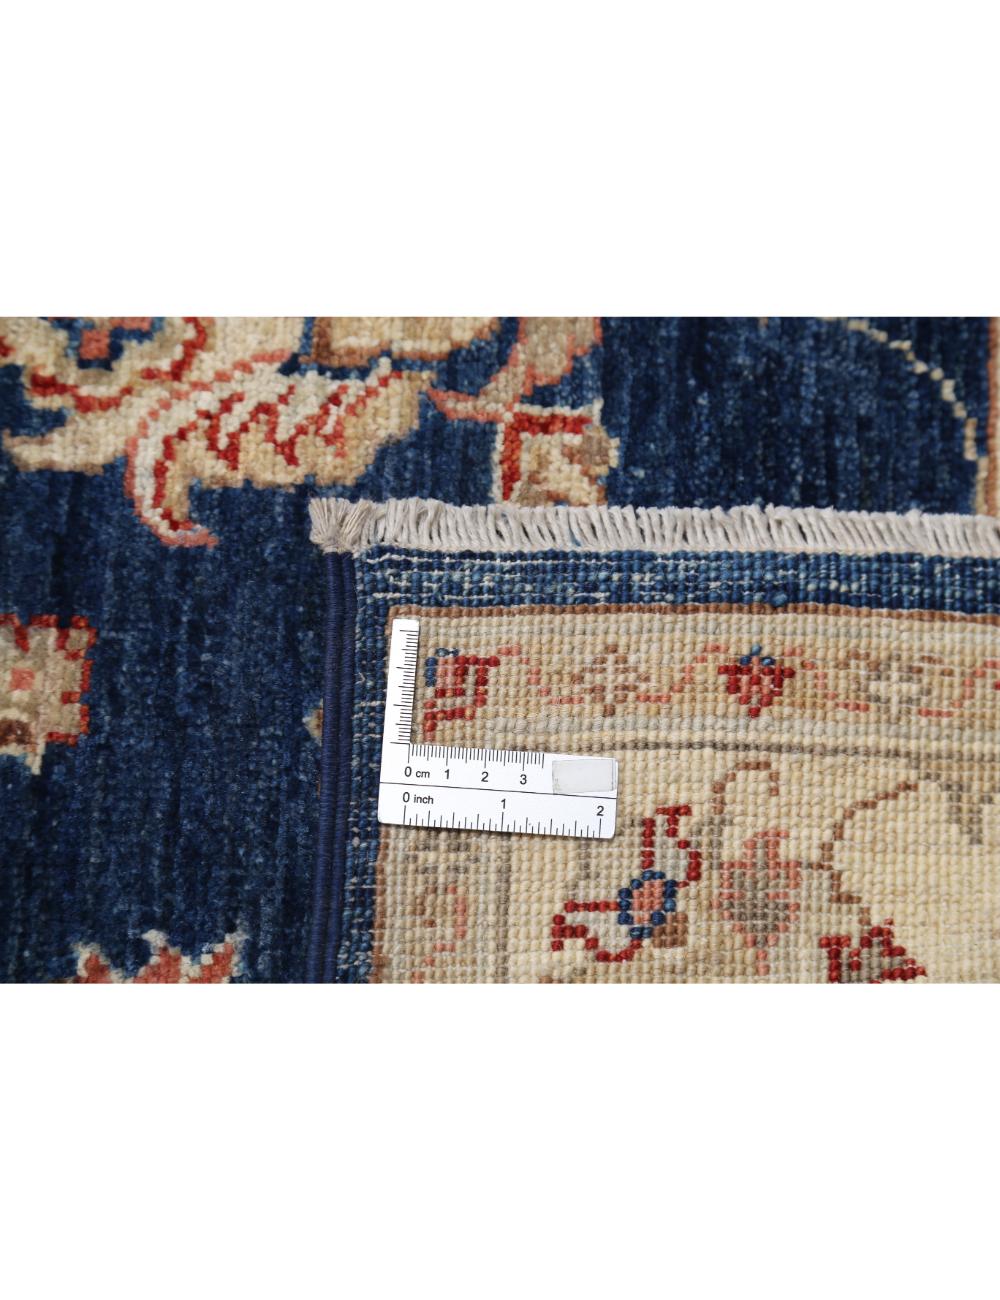 Ziegler 3' 2" X 6' 11" Hand-Knotted Wool Rug 3' 2" X 6' 11" (97 X 211) / Blue / Ivory